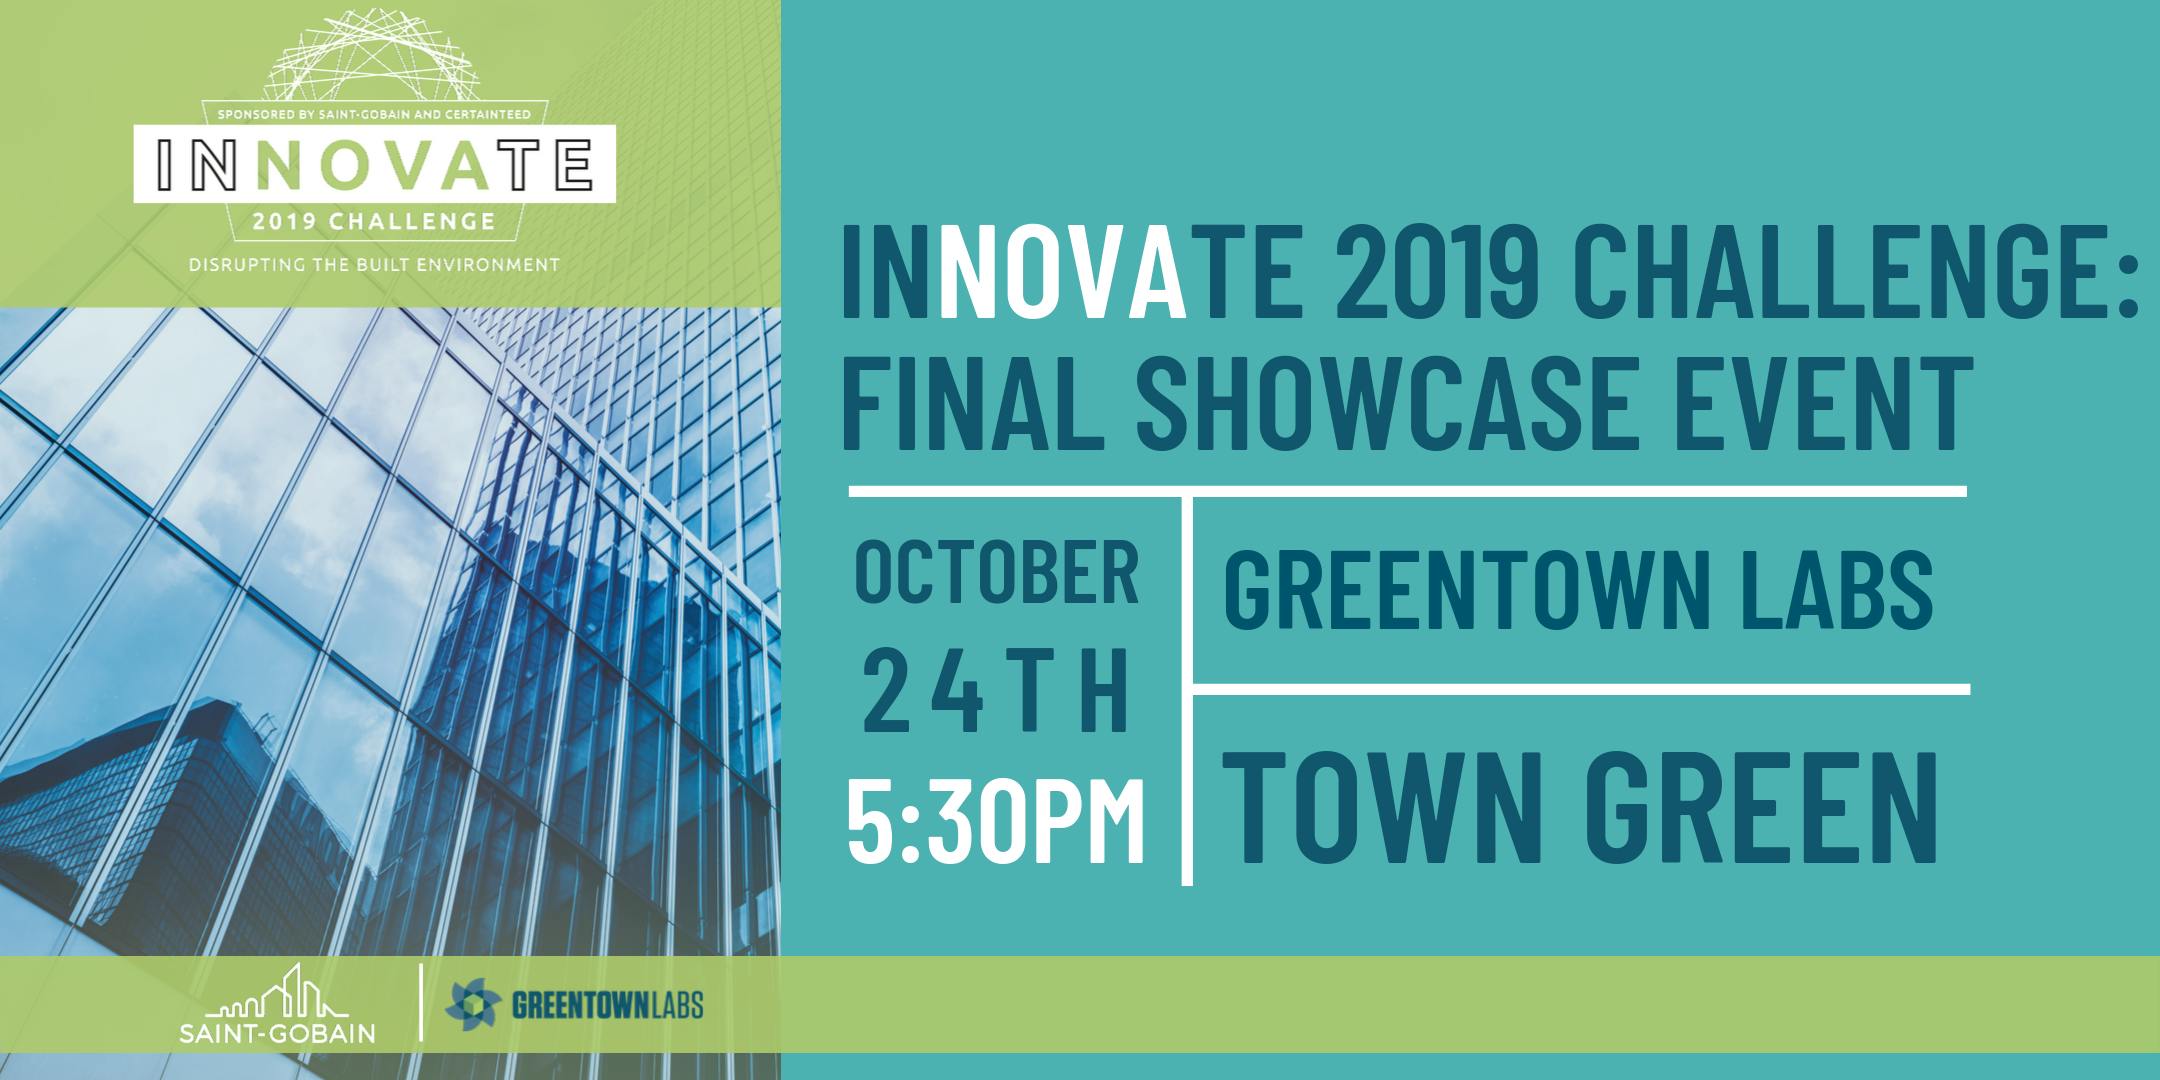 InNOVAte 2019 Challenge: Final Showcase Event